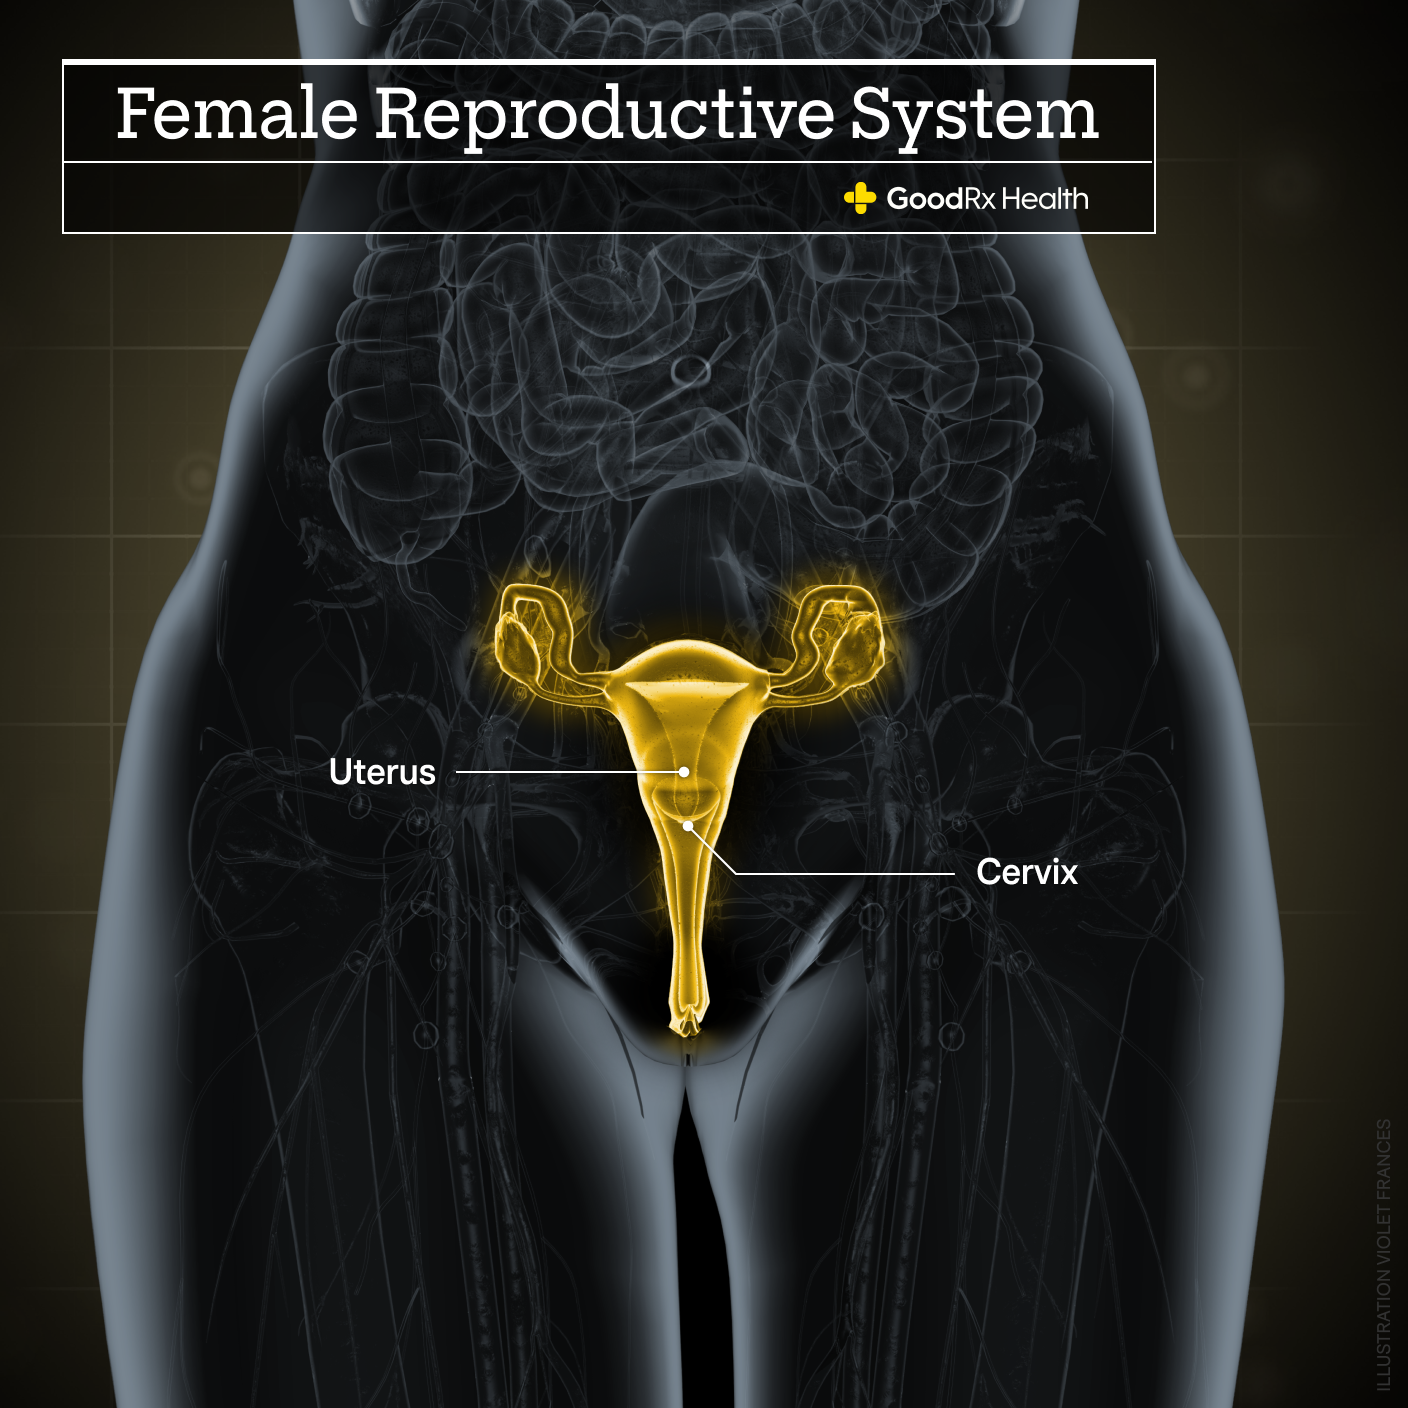 A 3D illustration of the female reproductive system highlighting the uterus and cervix.